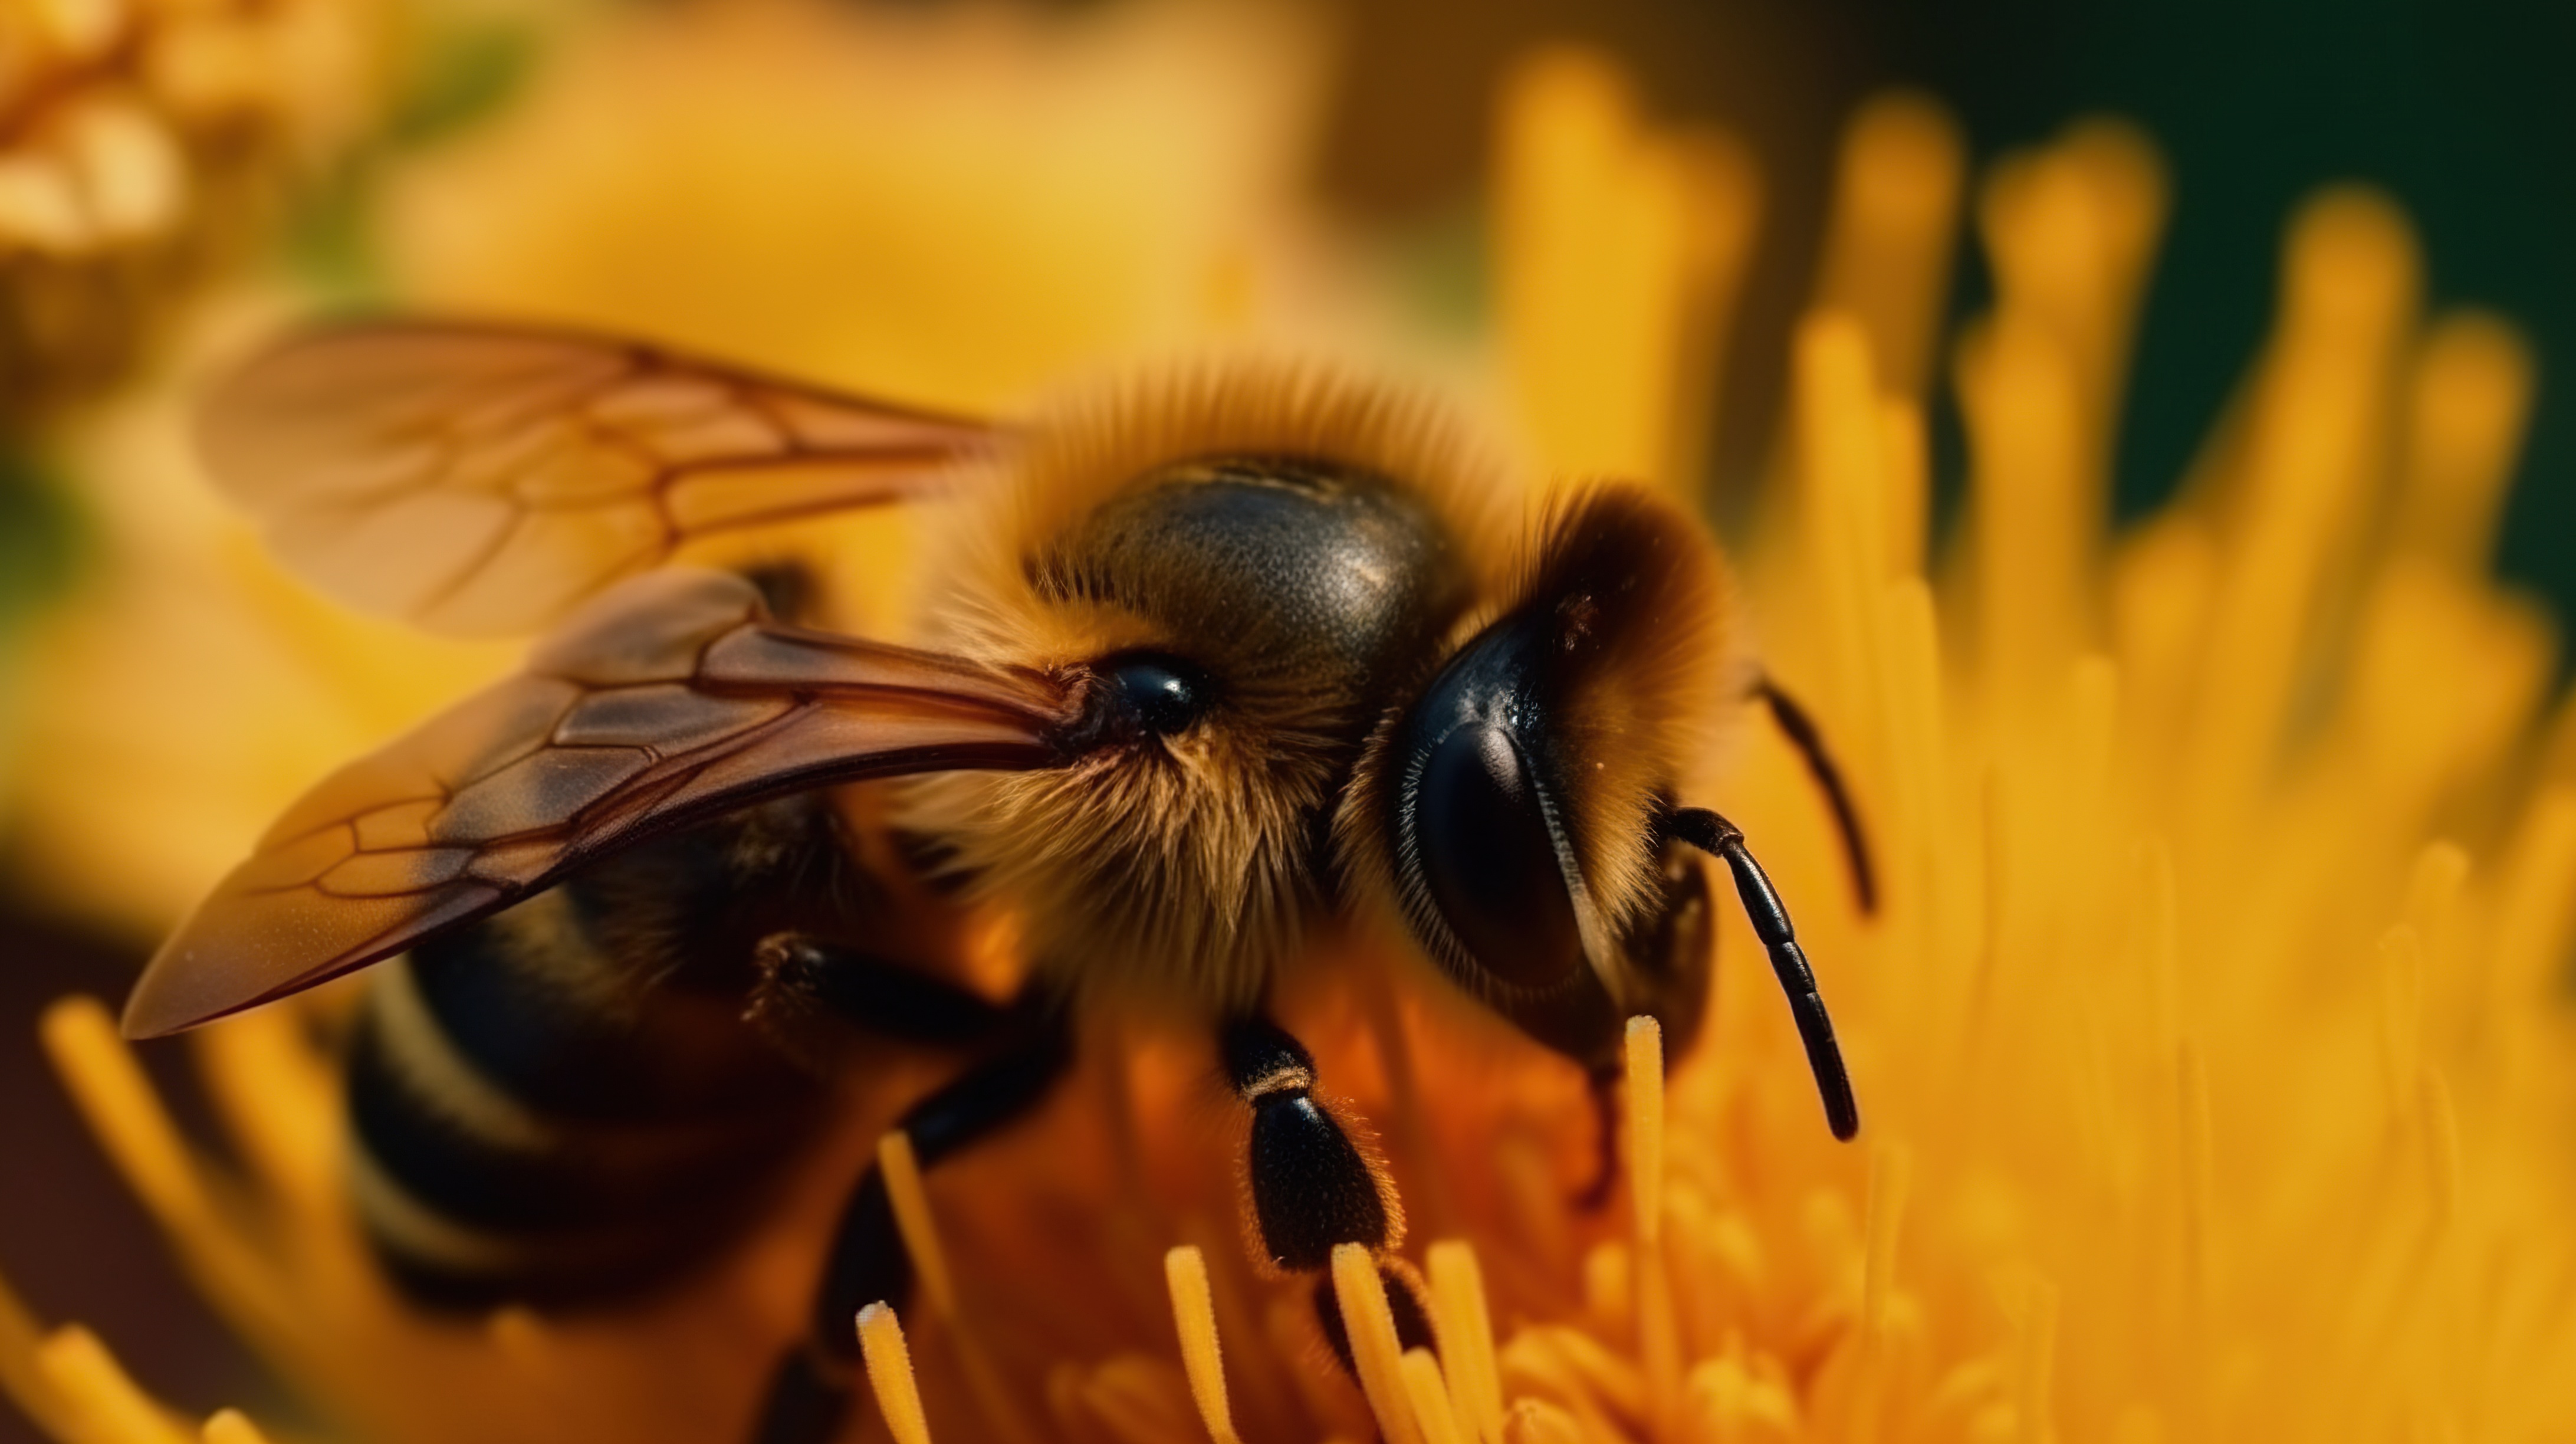 Close-up shot of a honey bee sitting on the yellow flower